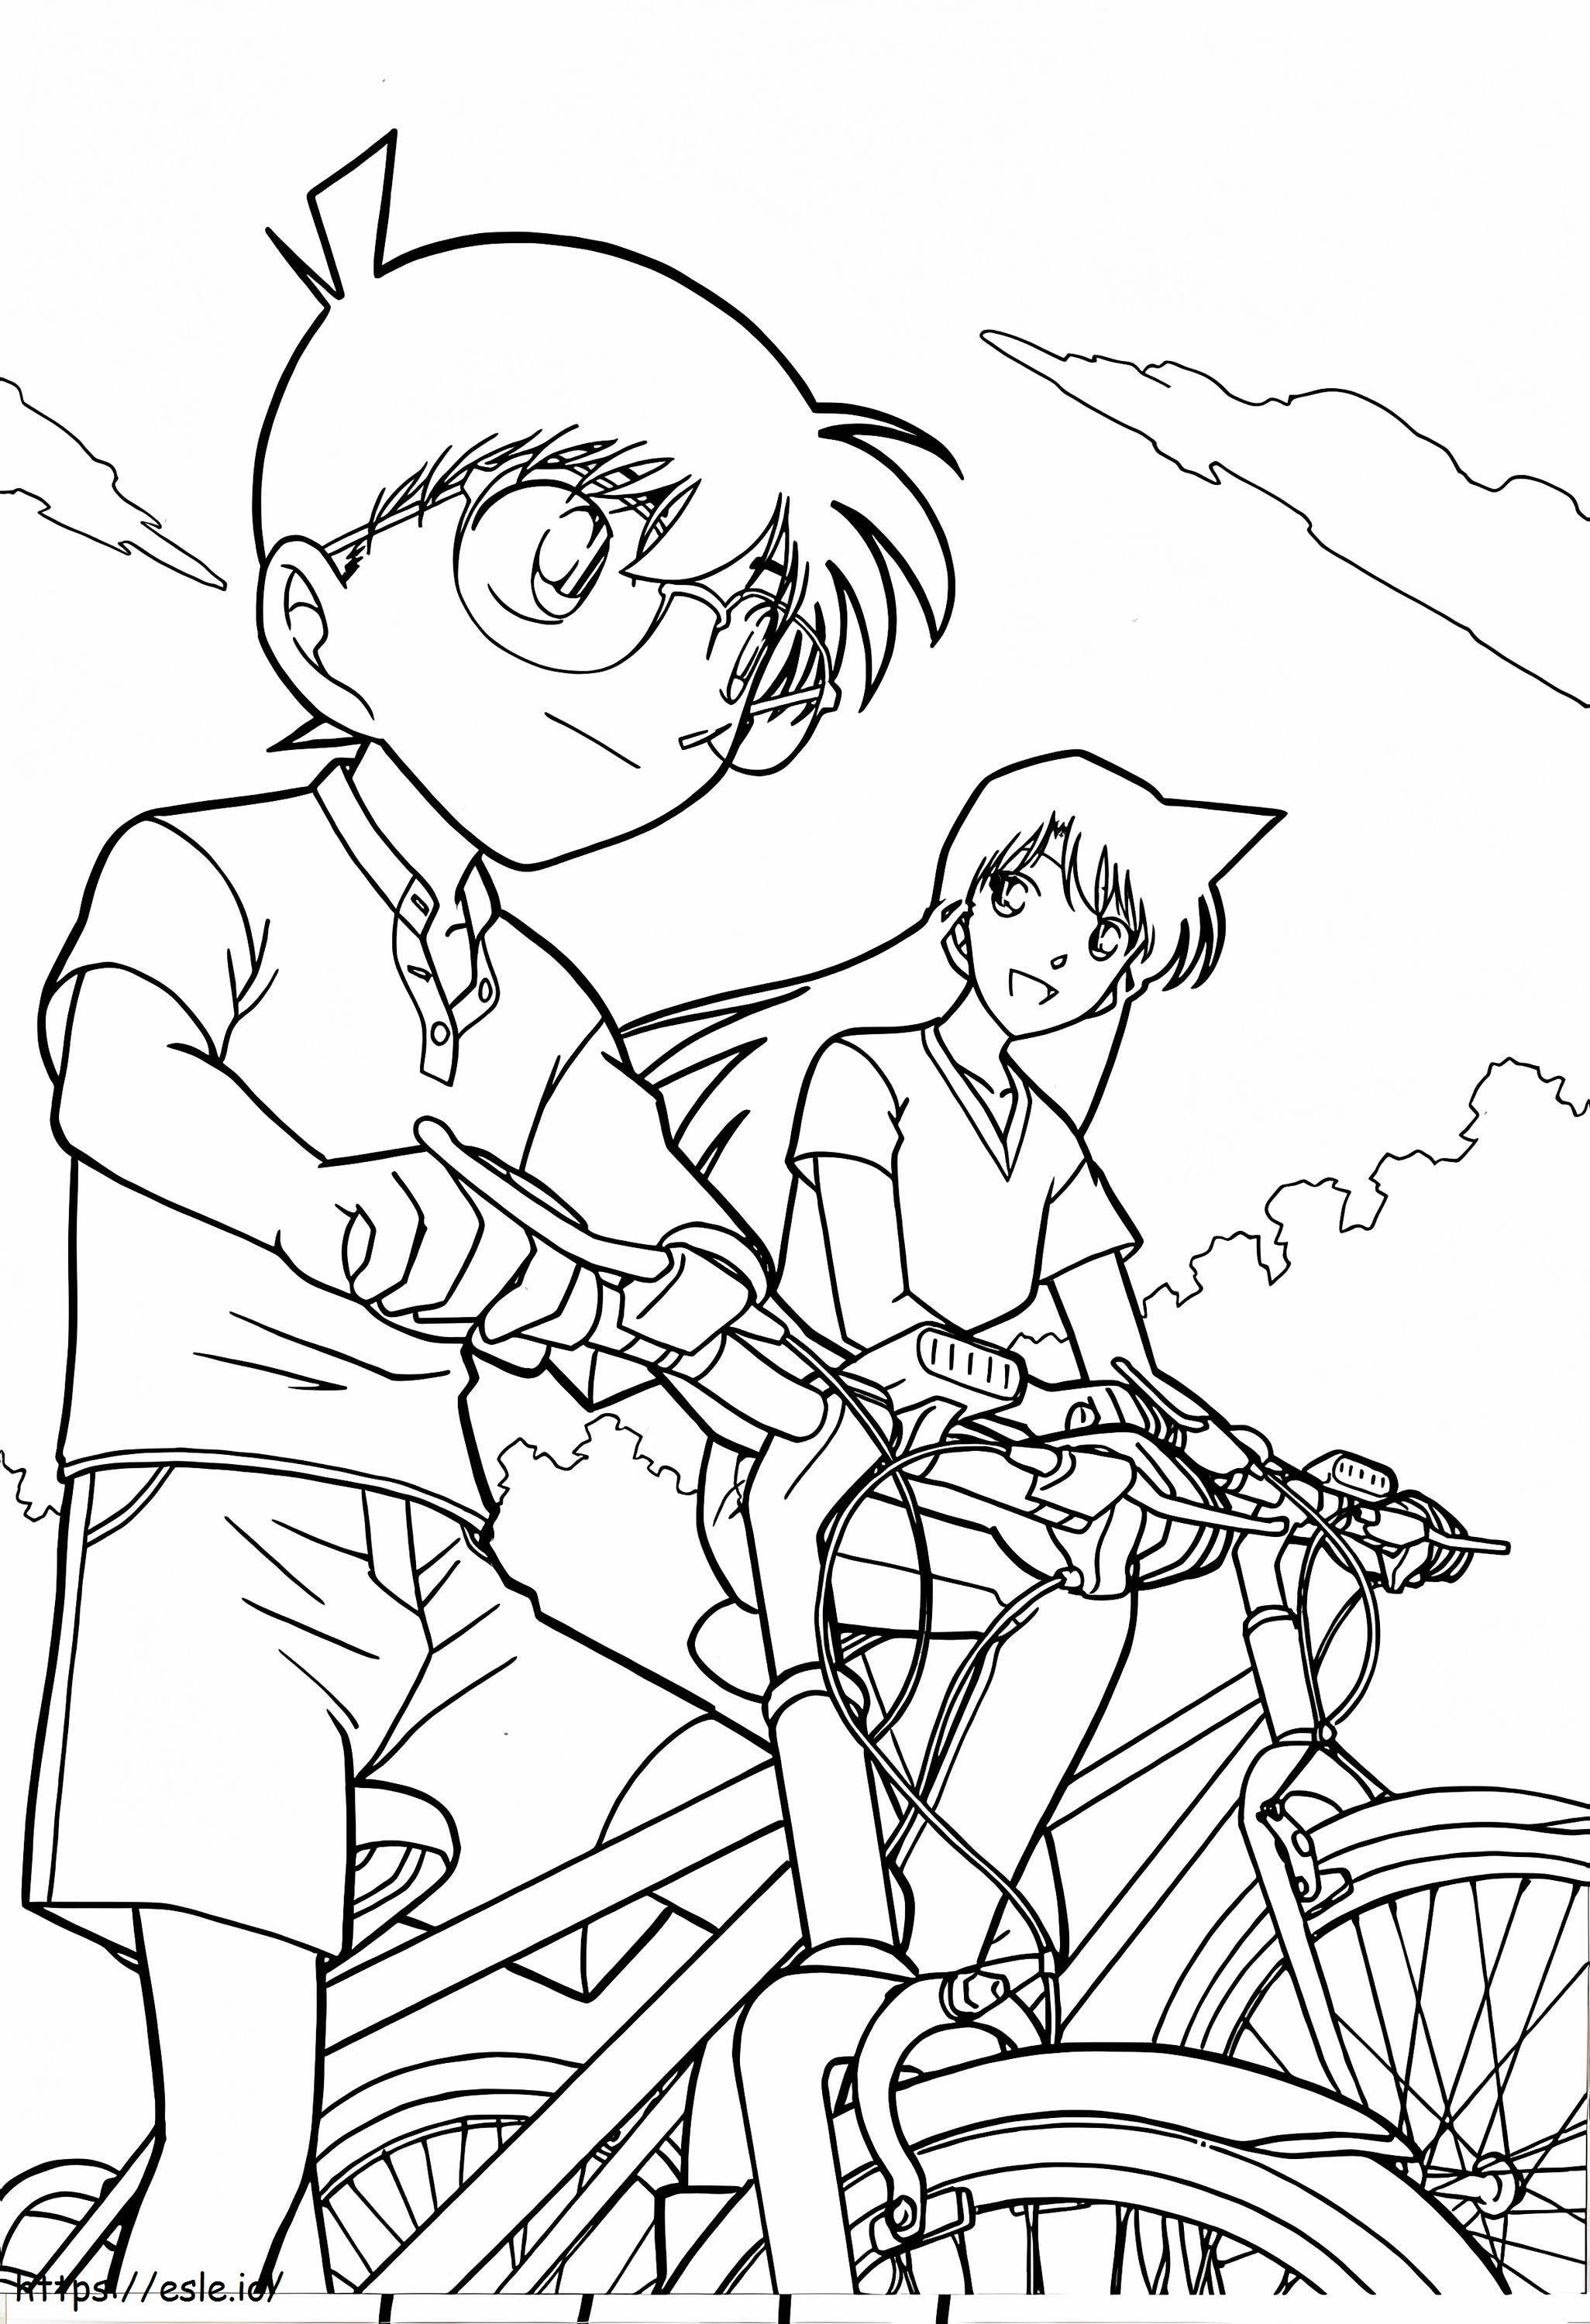 Conan And Ran On A Bike coloring page